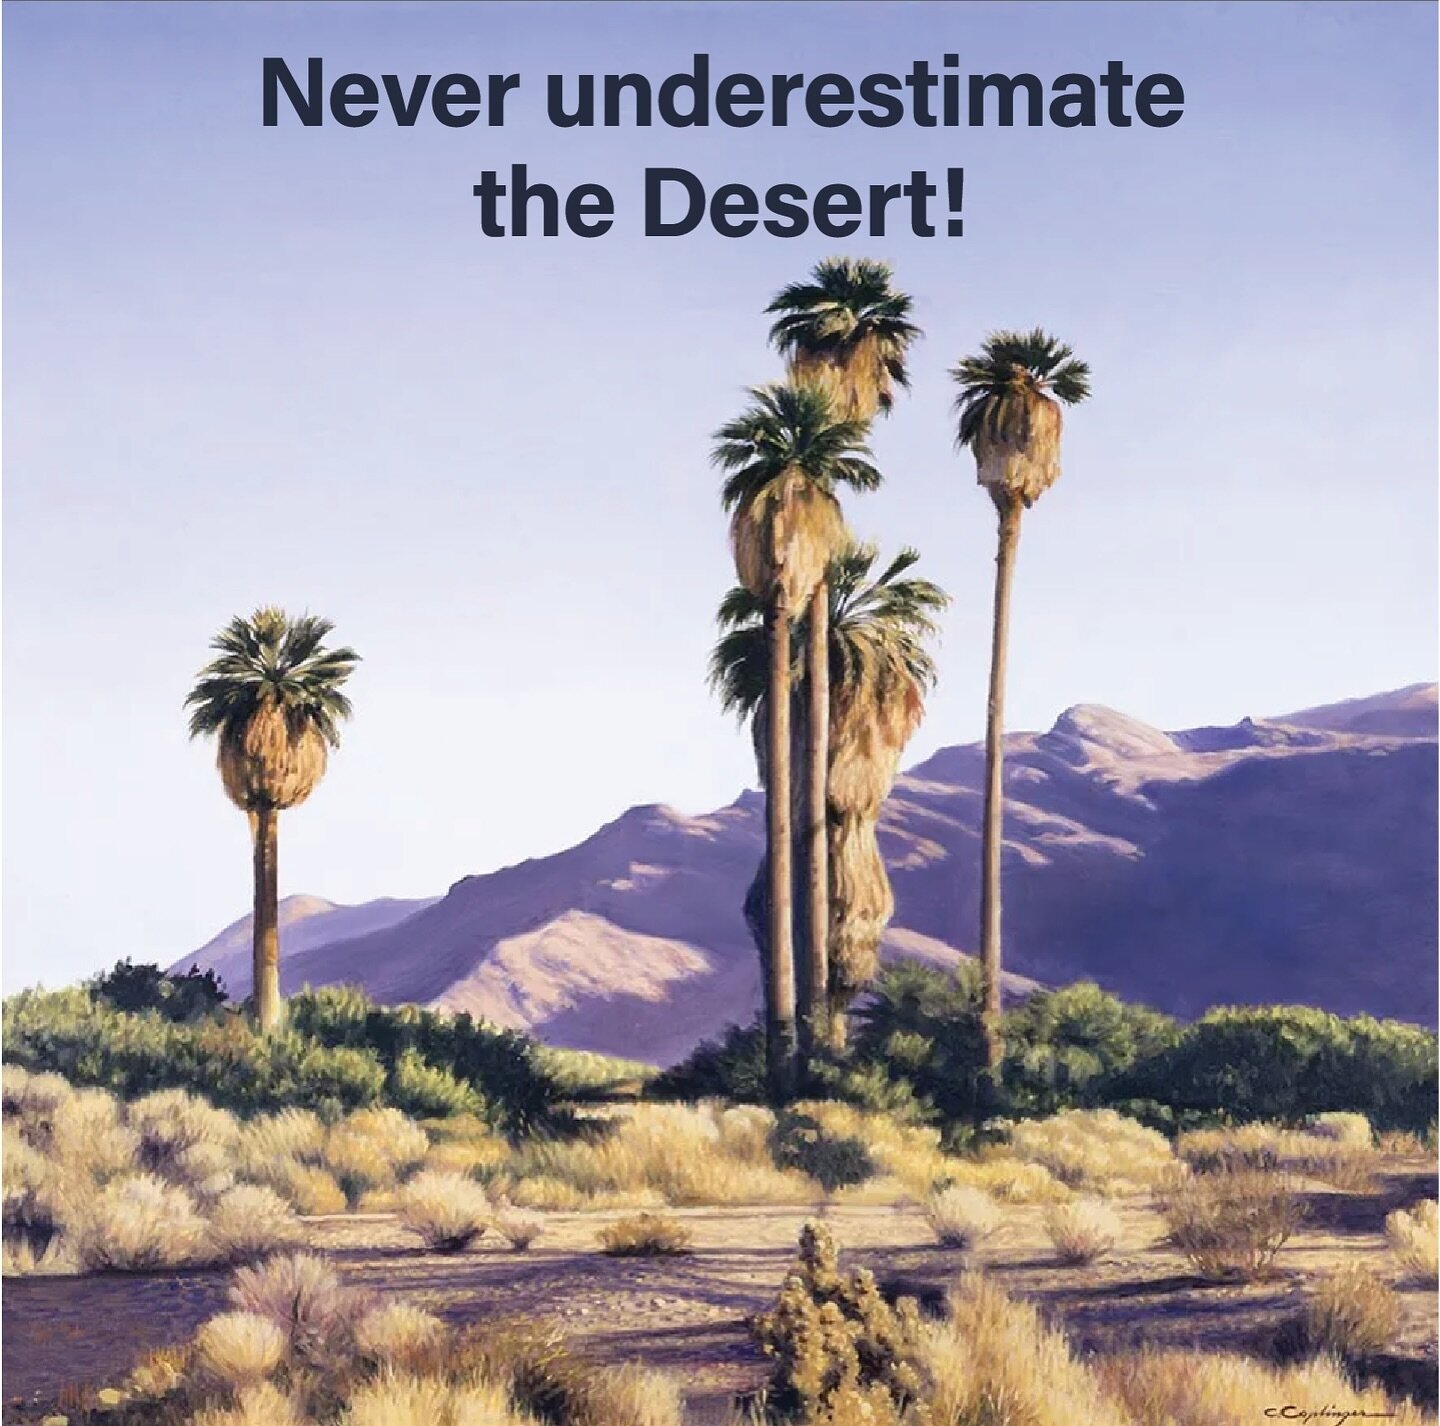 Join us for the 2024 Twentynine Palms Festival Launch Party and for &ldquo;Never underestimate the Desert&rdquo;, an engaging conversation about the diverse stories the Desert can tell &ndash; not only from a human perspective.

Alicia Pike (@wanderi